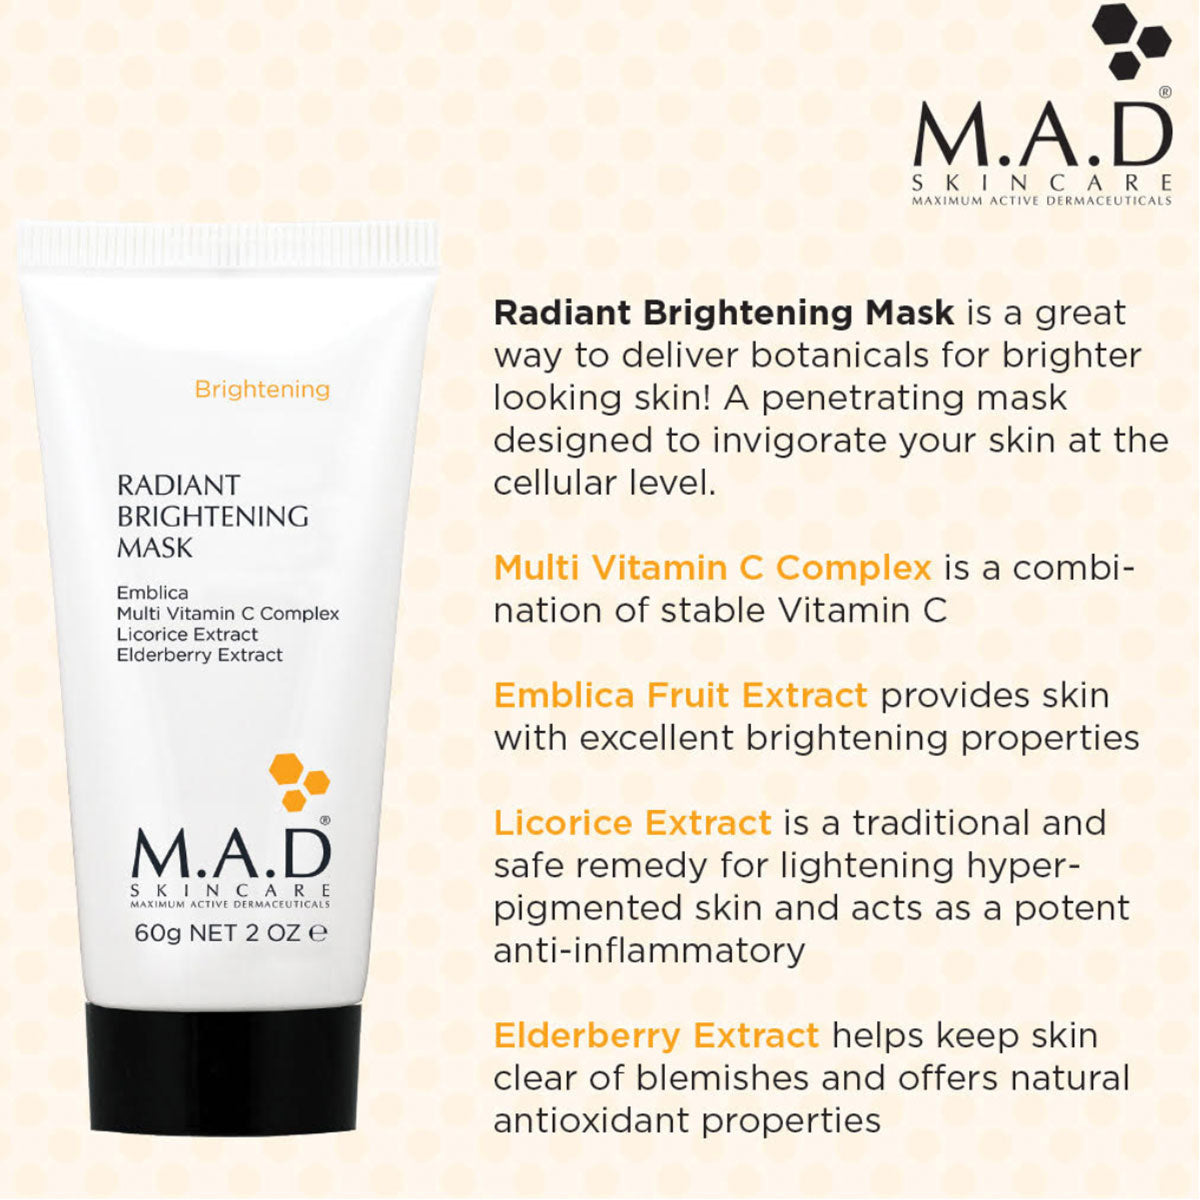 M.A.D Radiant Brightening Mask